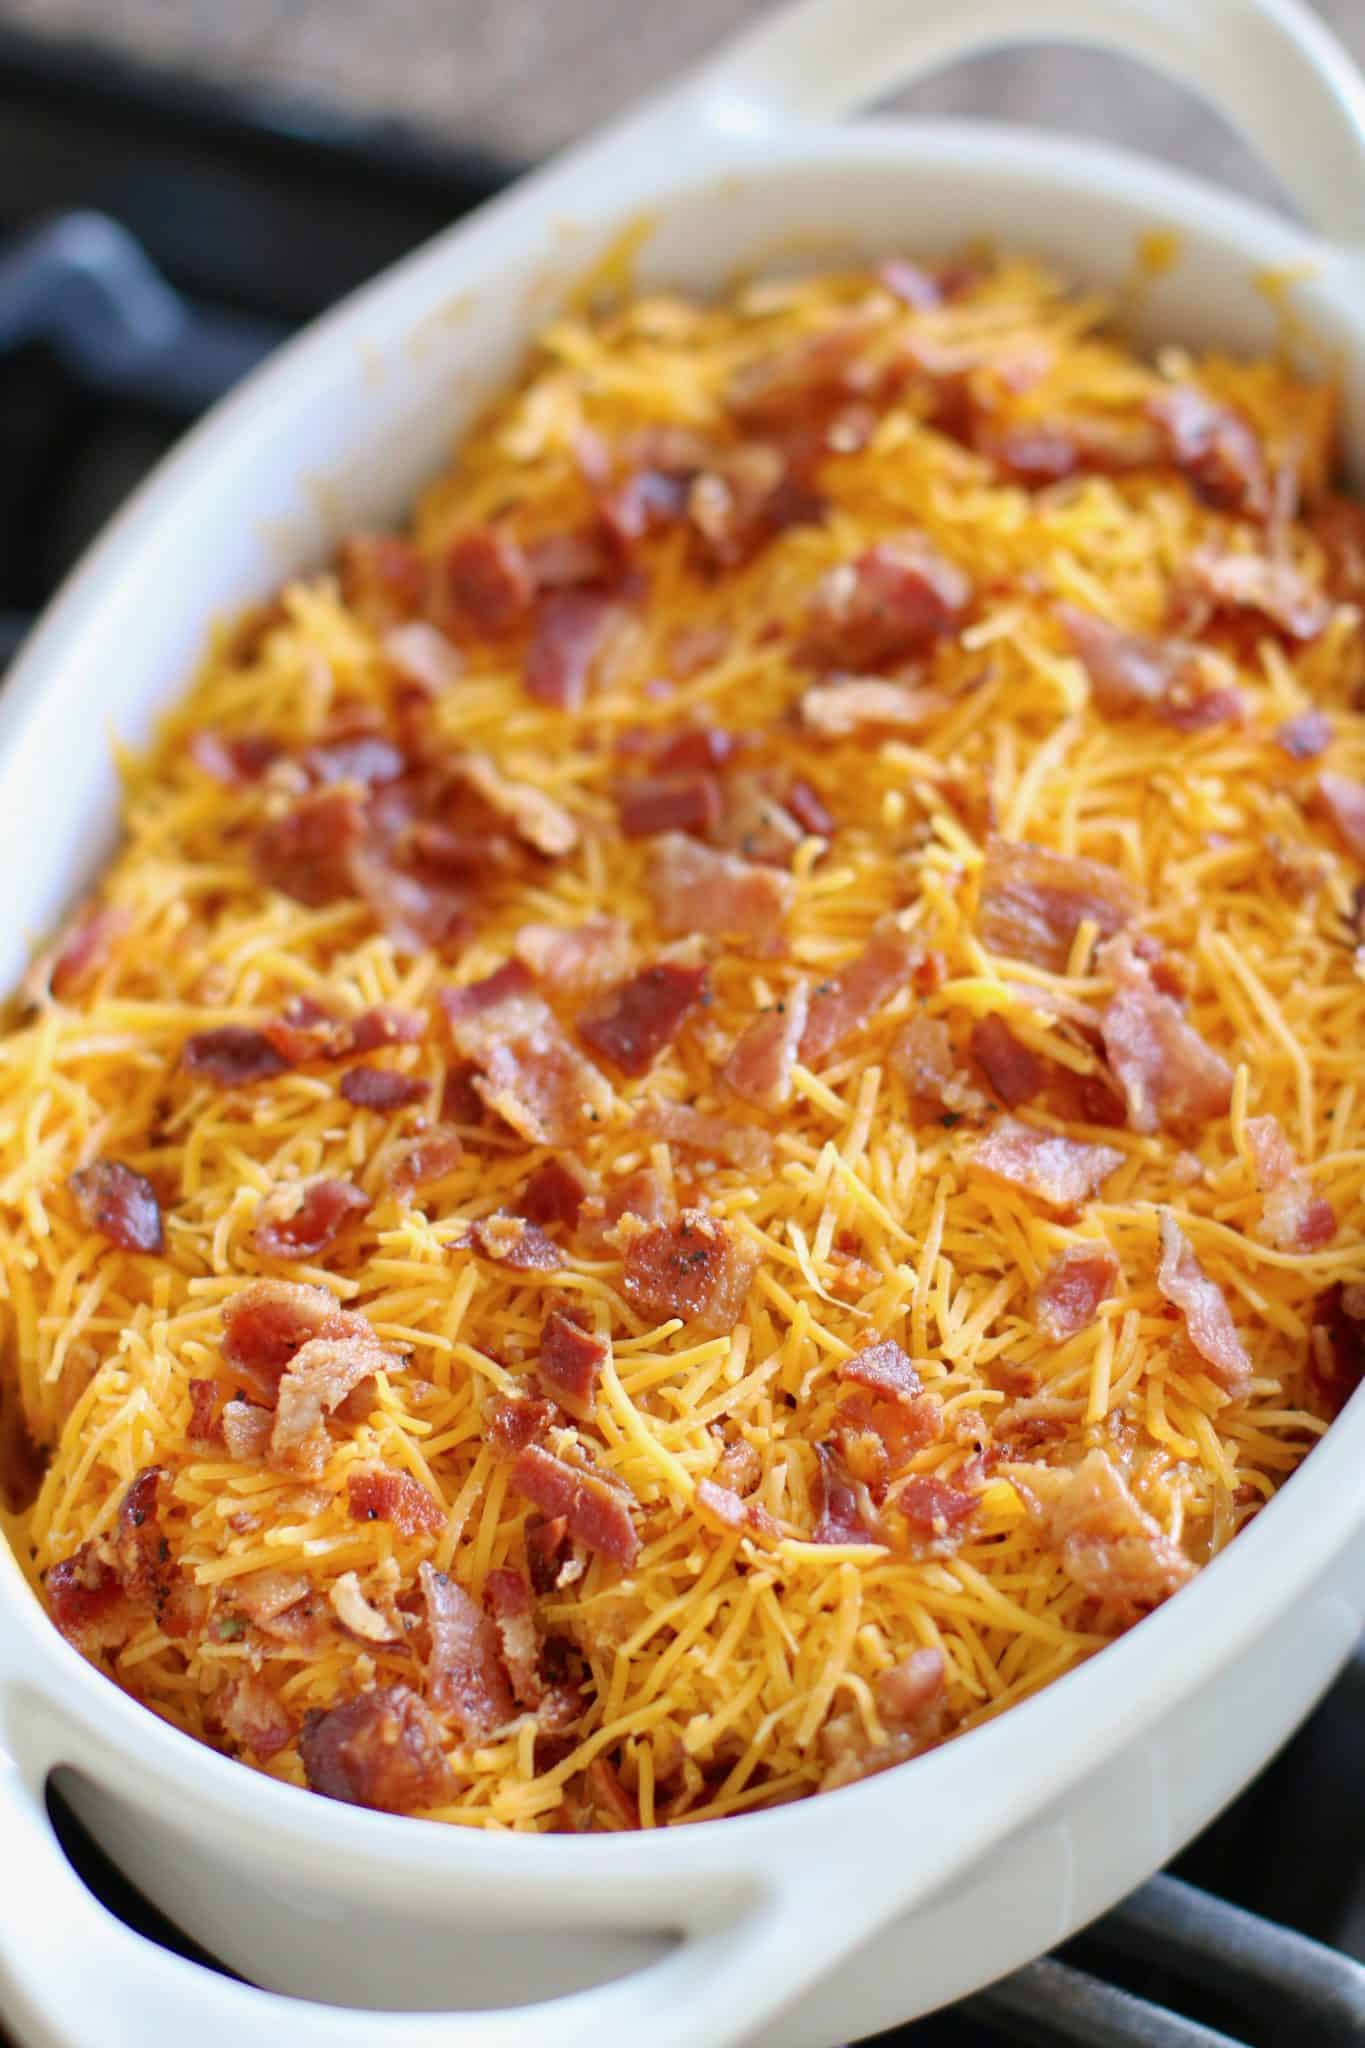 shredded cheese and chopped bacon shown covering the tex Mex potatoes in the white oval baking dish. 